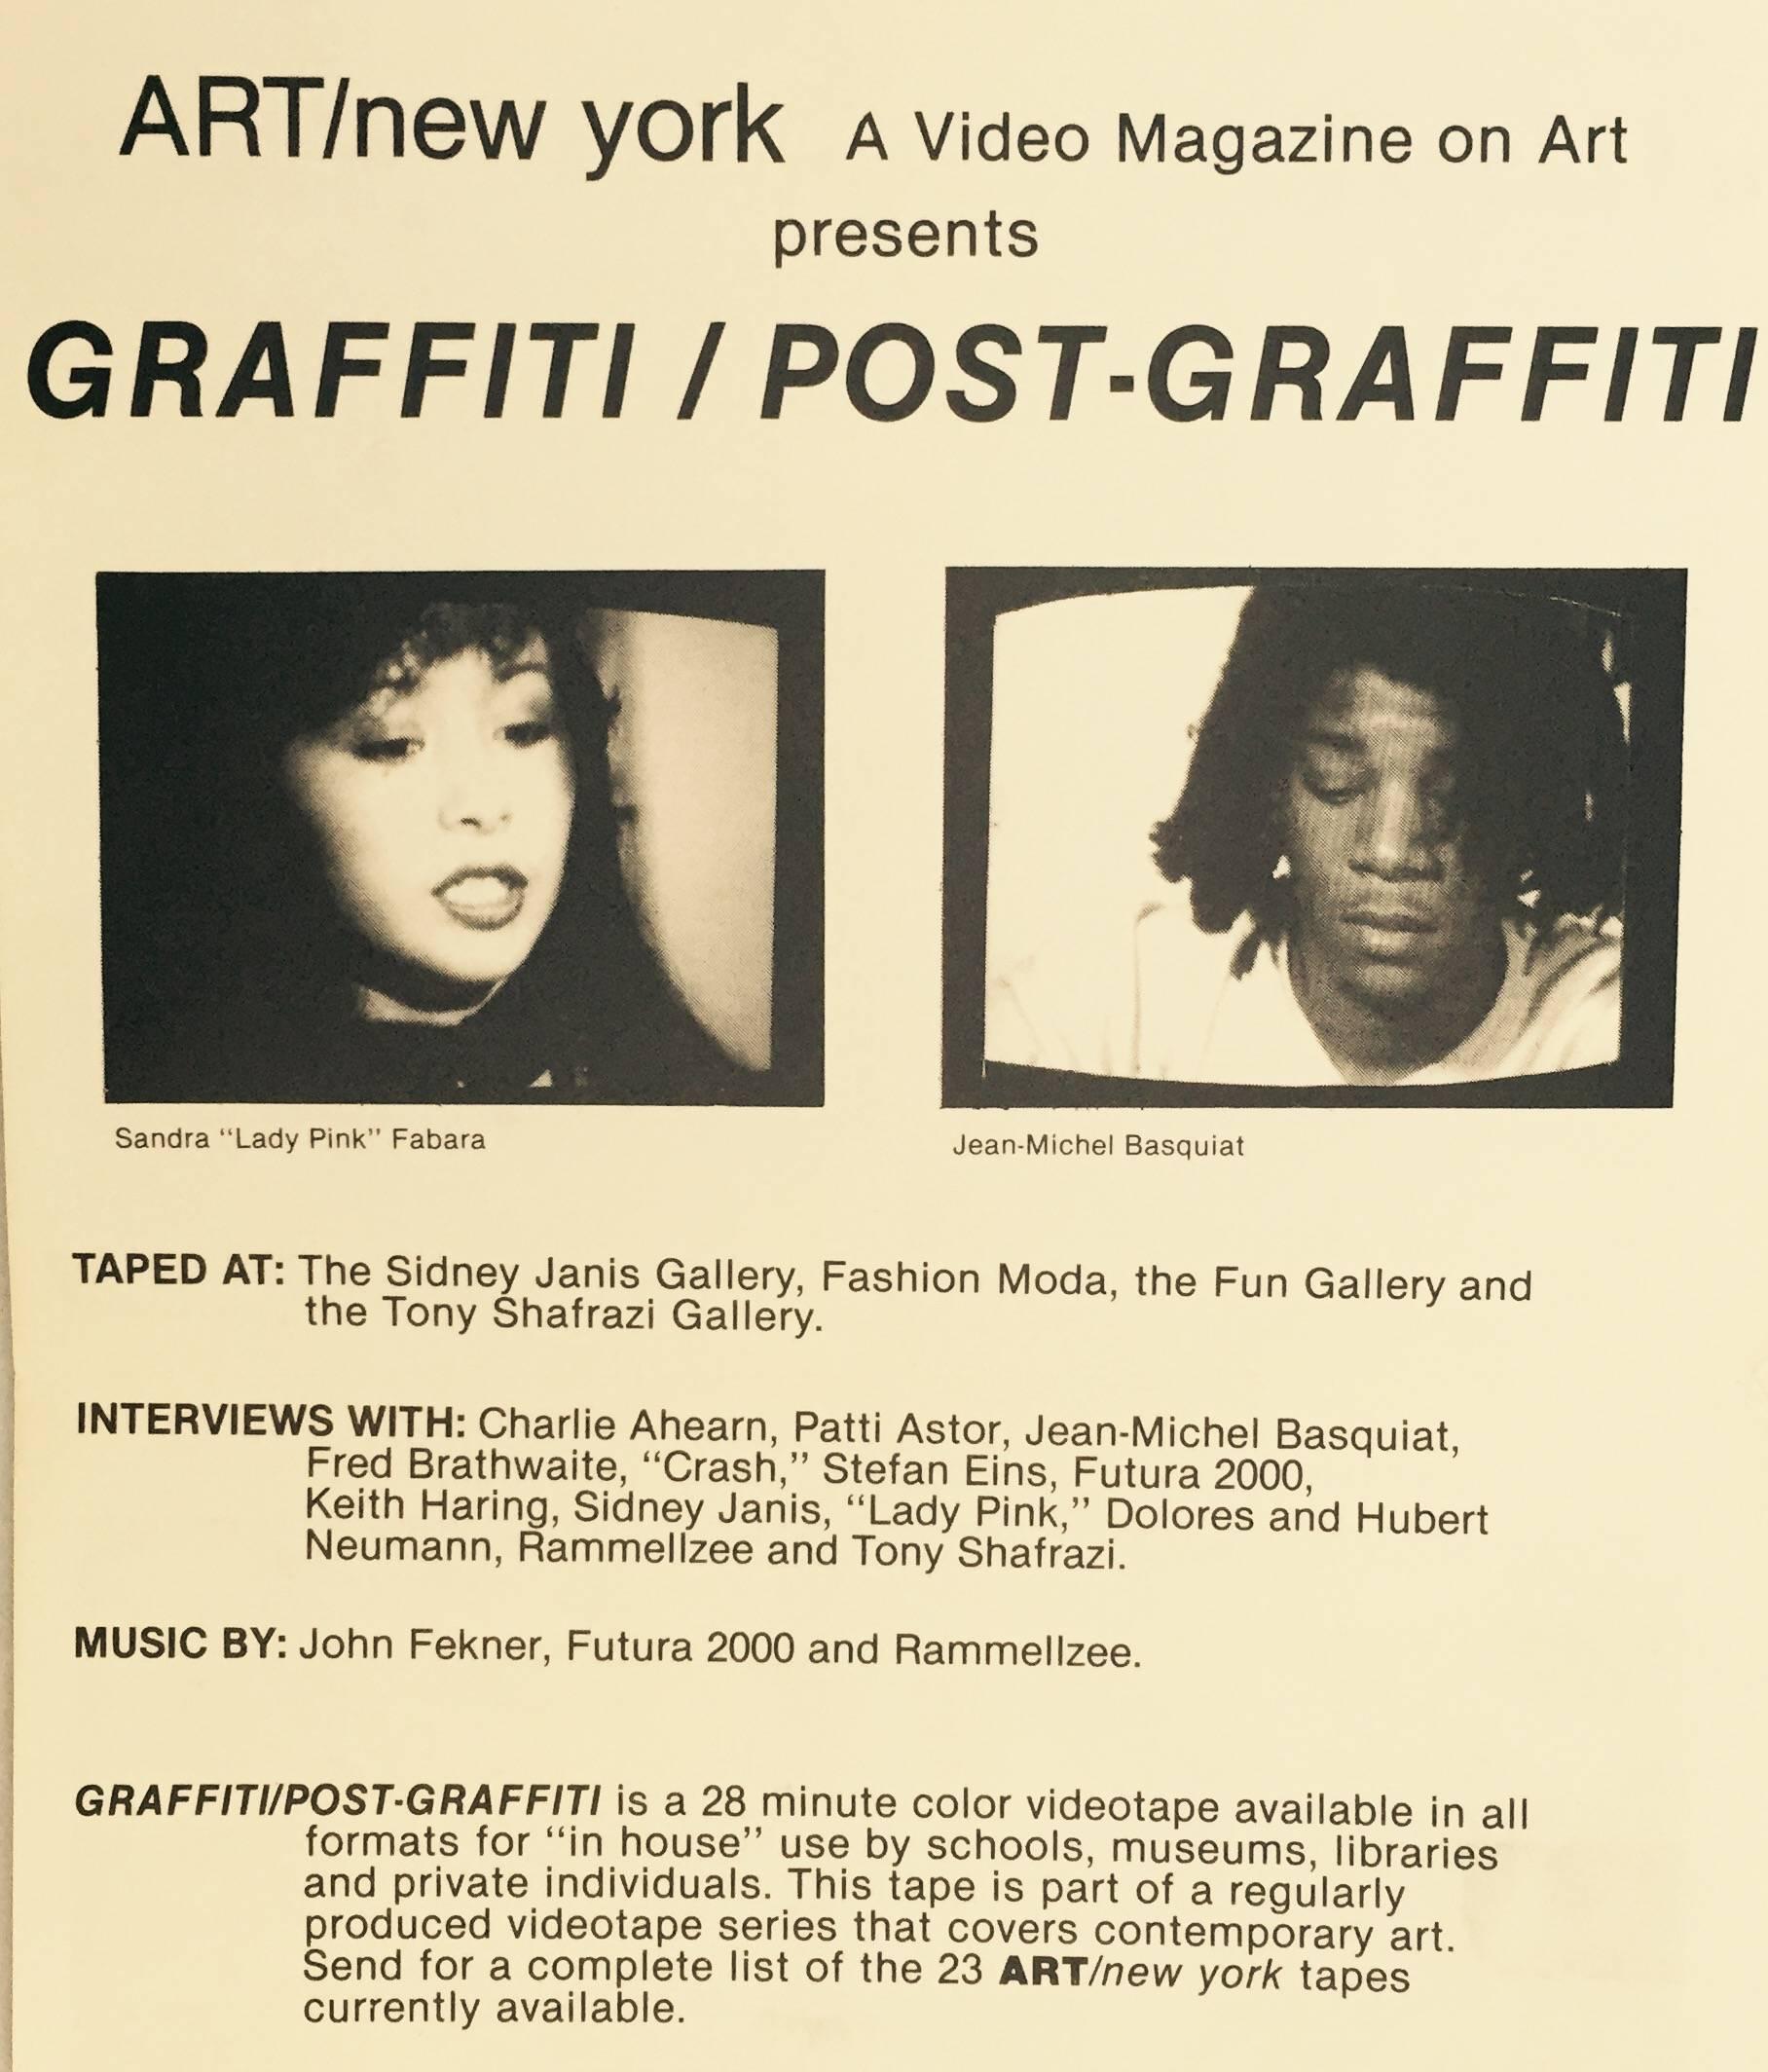 Basquiat, Keith Haring, Futura 2000 & more
ART/New York: “Graffiti/Post-Graffiti,” 1984 announcement card featuring original photographs of Basquiat, Keith Haring, Rammellzee, & Lady Pink. A historic New York graffiti collectible, suitable for